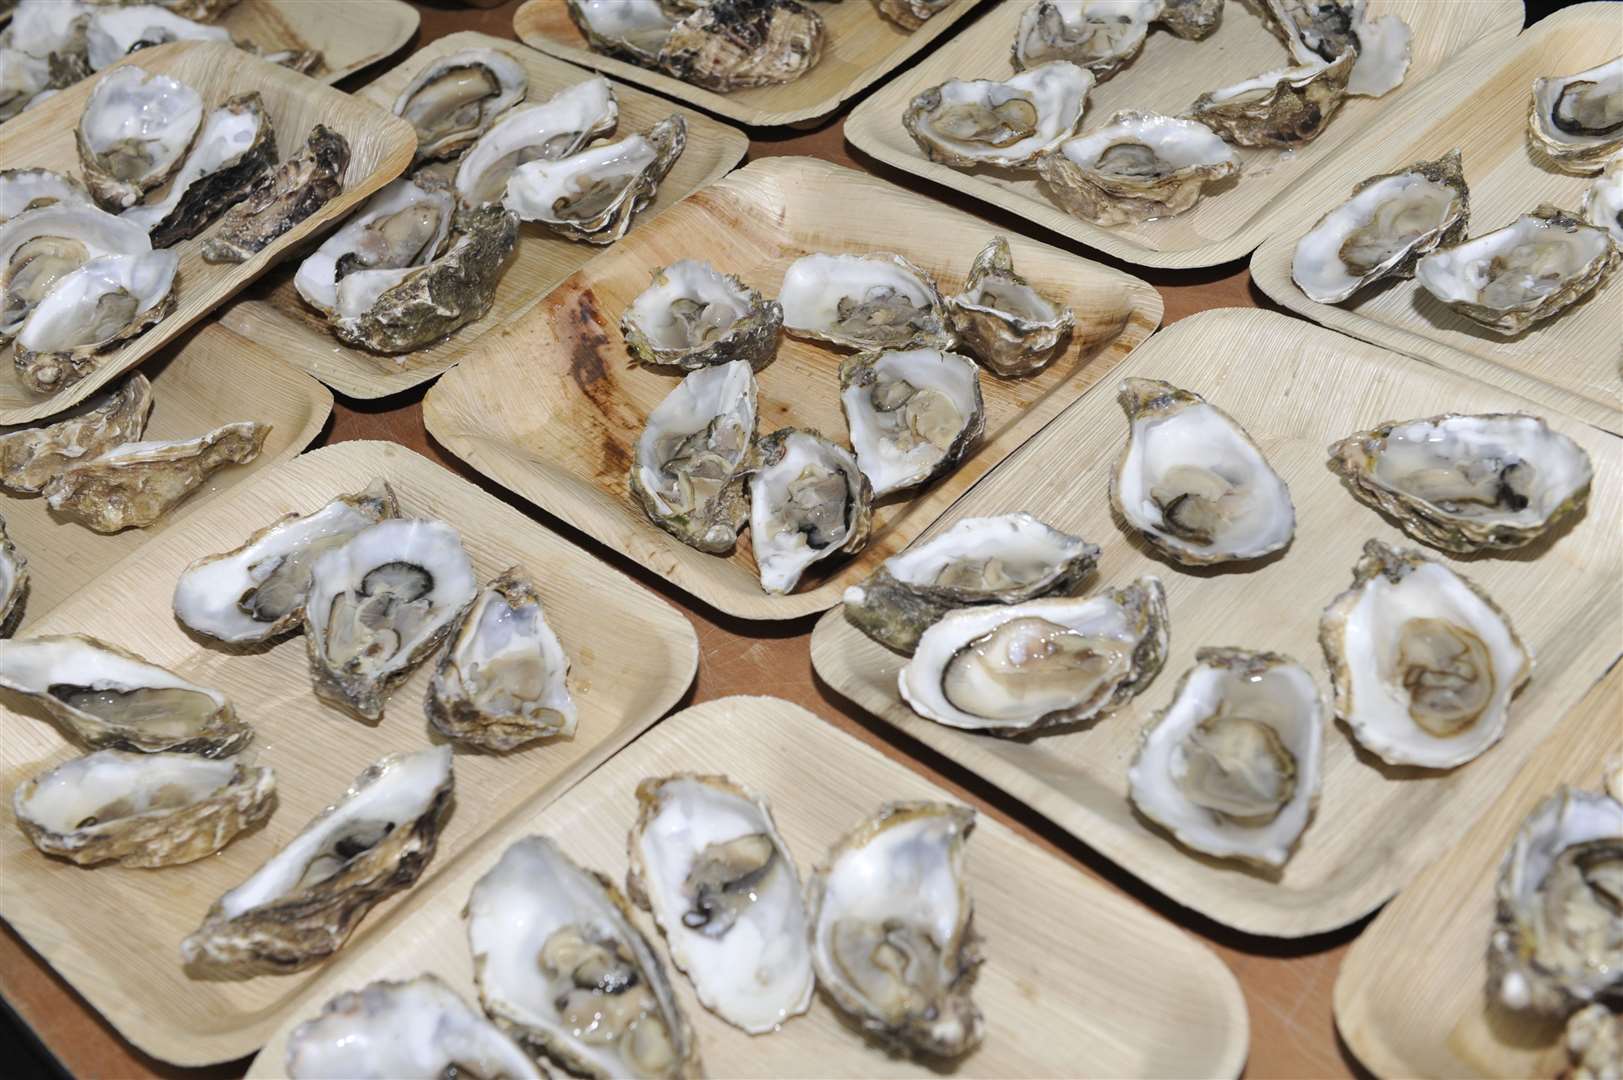 About 100 people reportedly fell ill in June after eating the Whitstable oysters, before more people suffered bouts of sickness last month